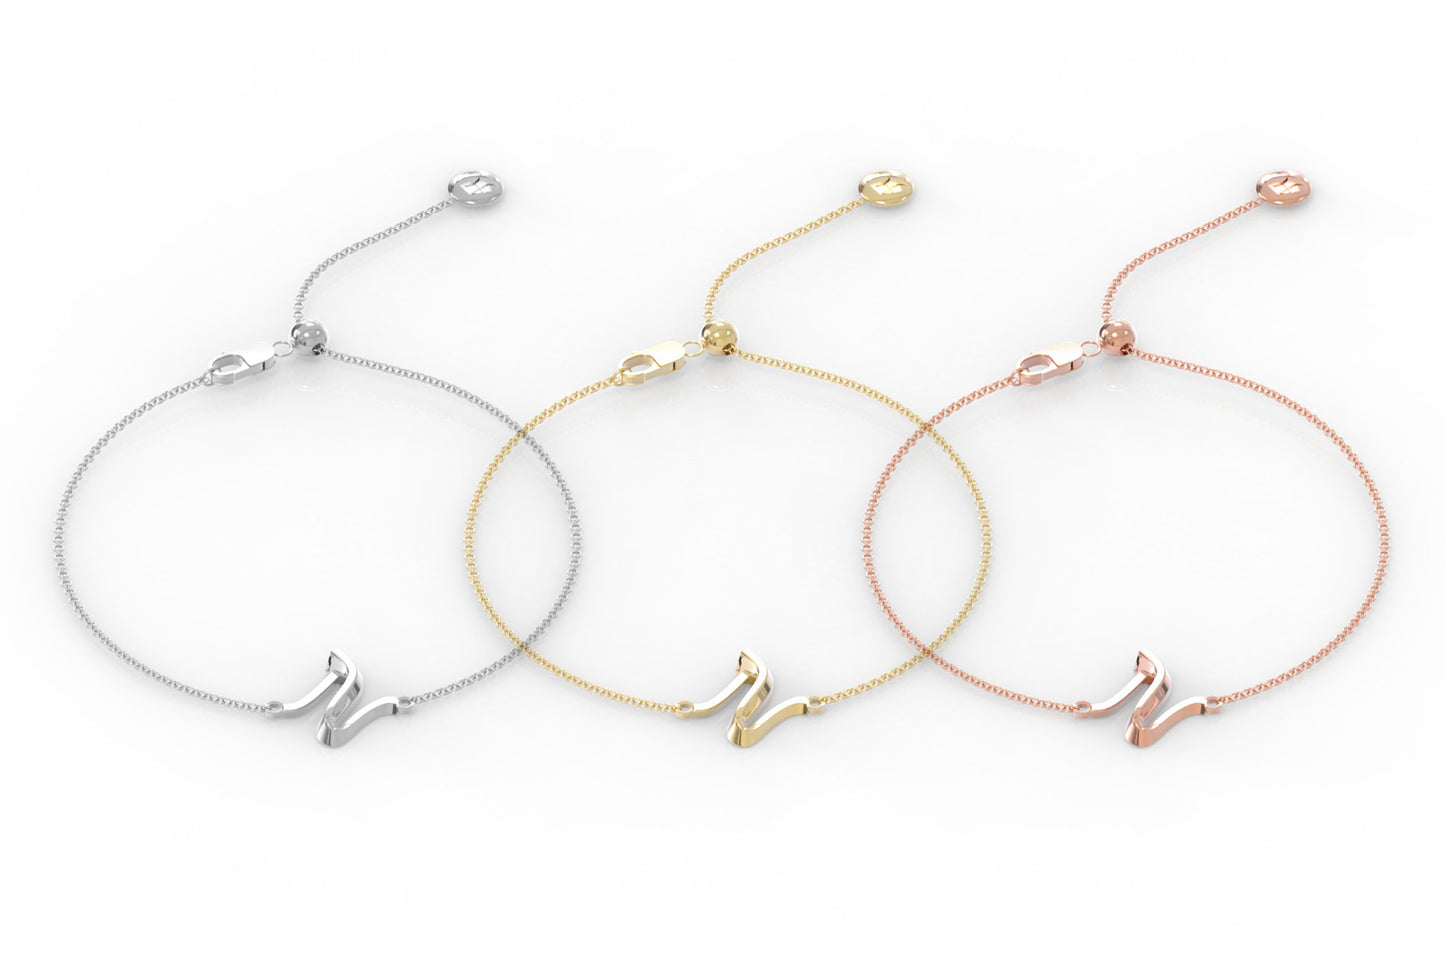 The Love Collect - "R" Bracelet